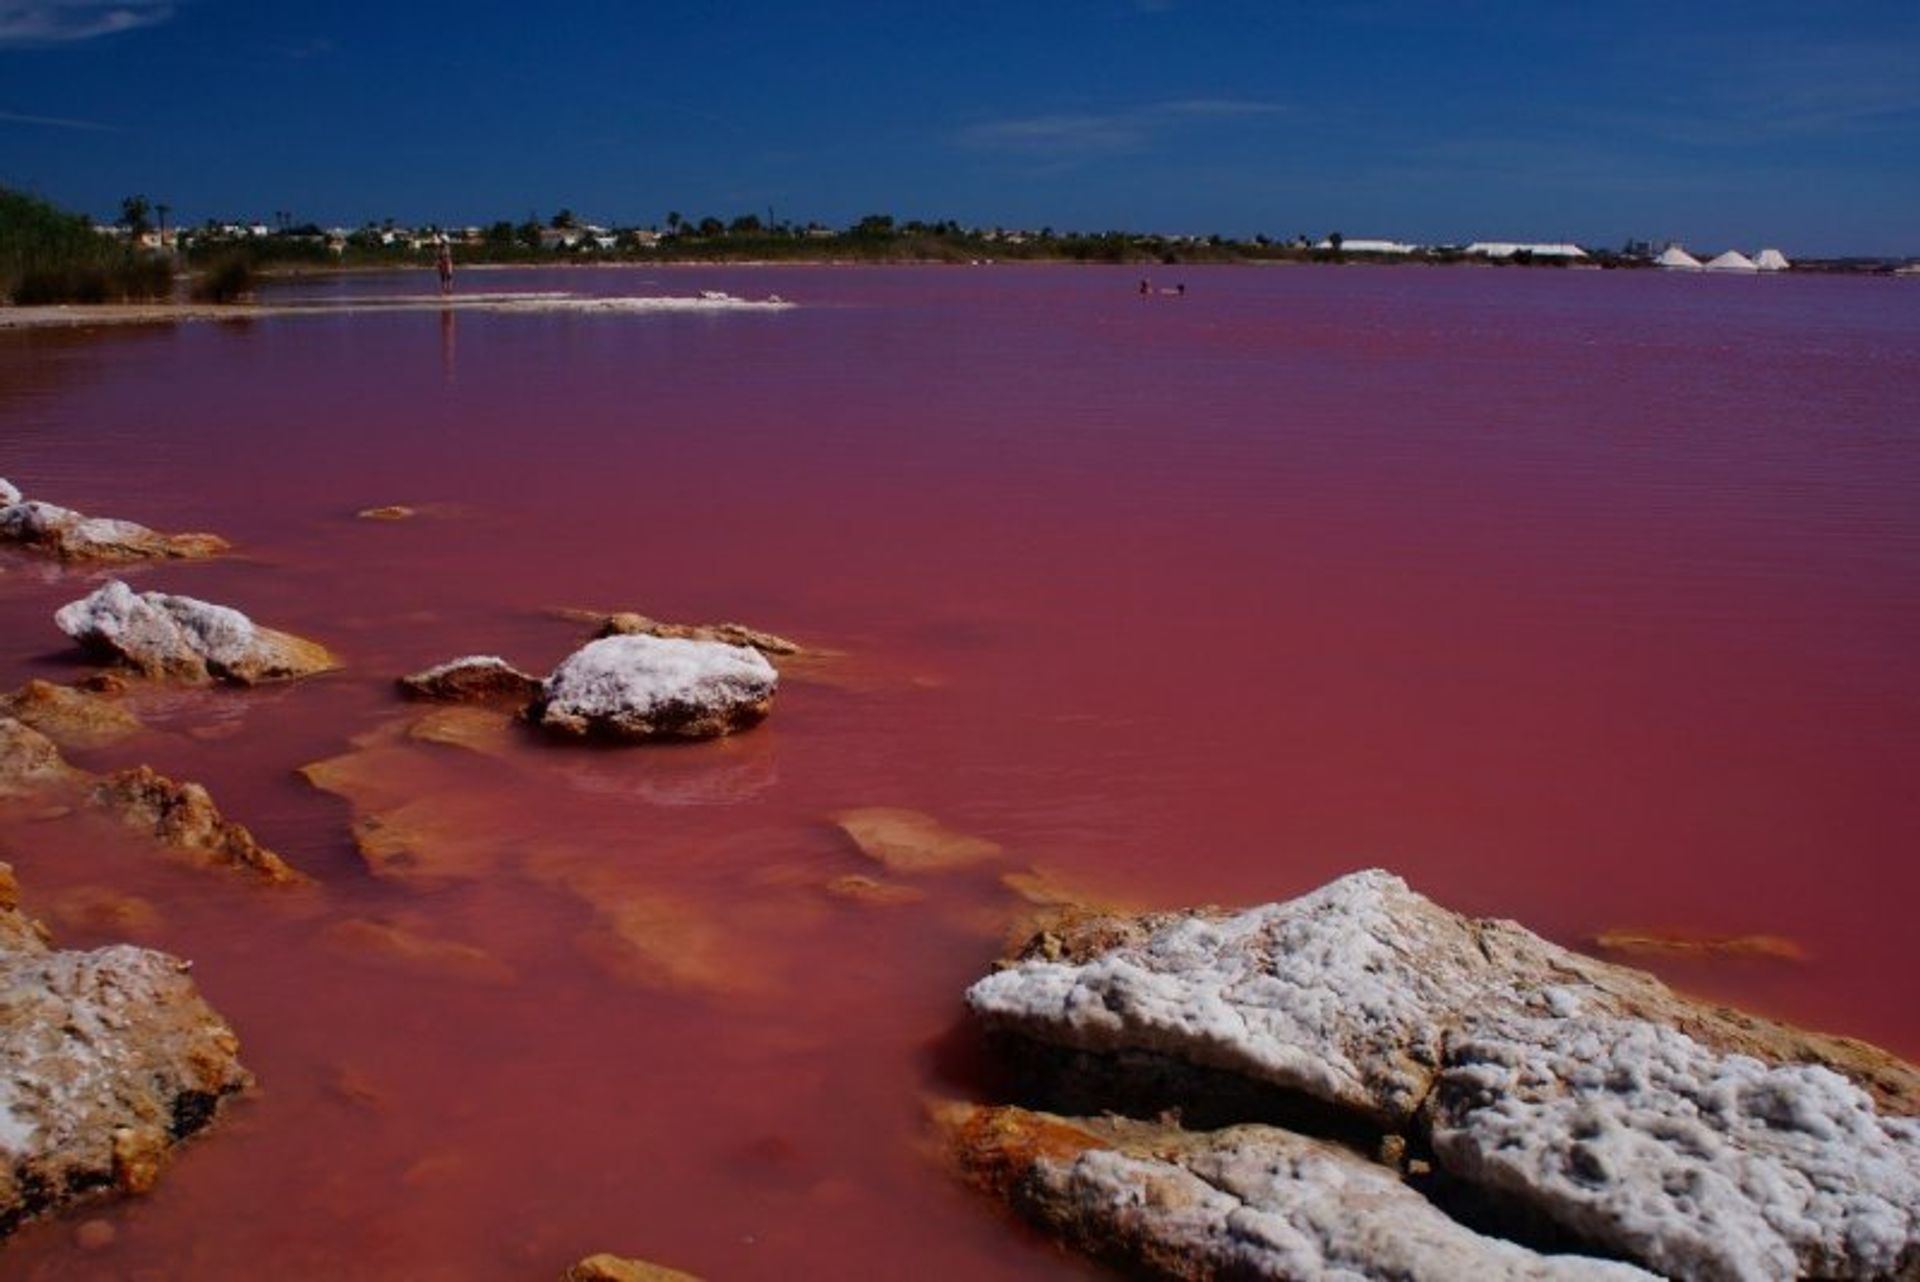 With an about 25 minute drive from Algorfa, Torrevieja is famous for its two cleansing saltwater lakes; one pink and the other green